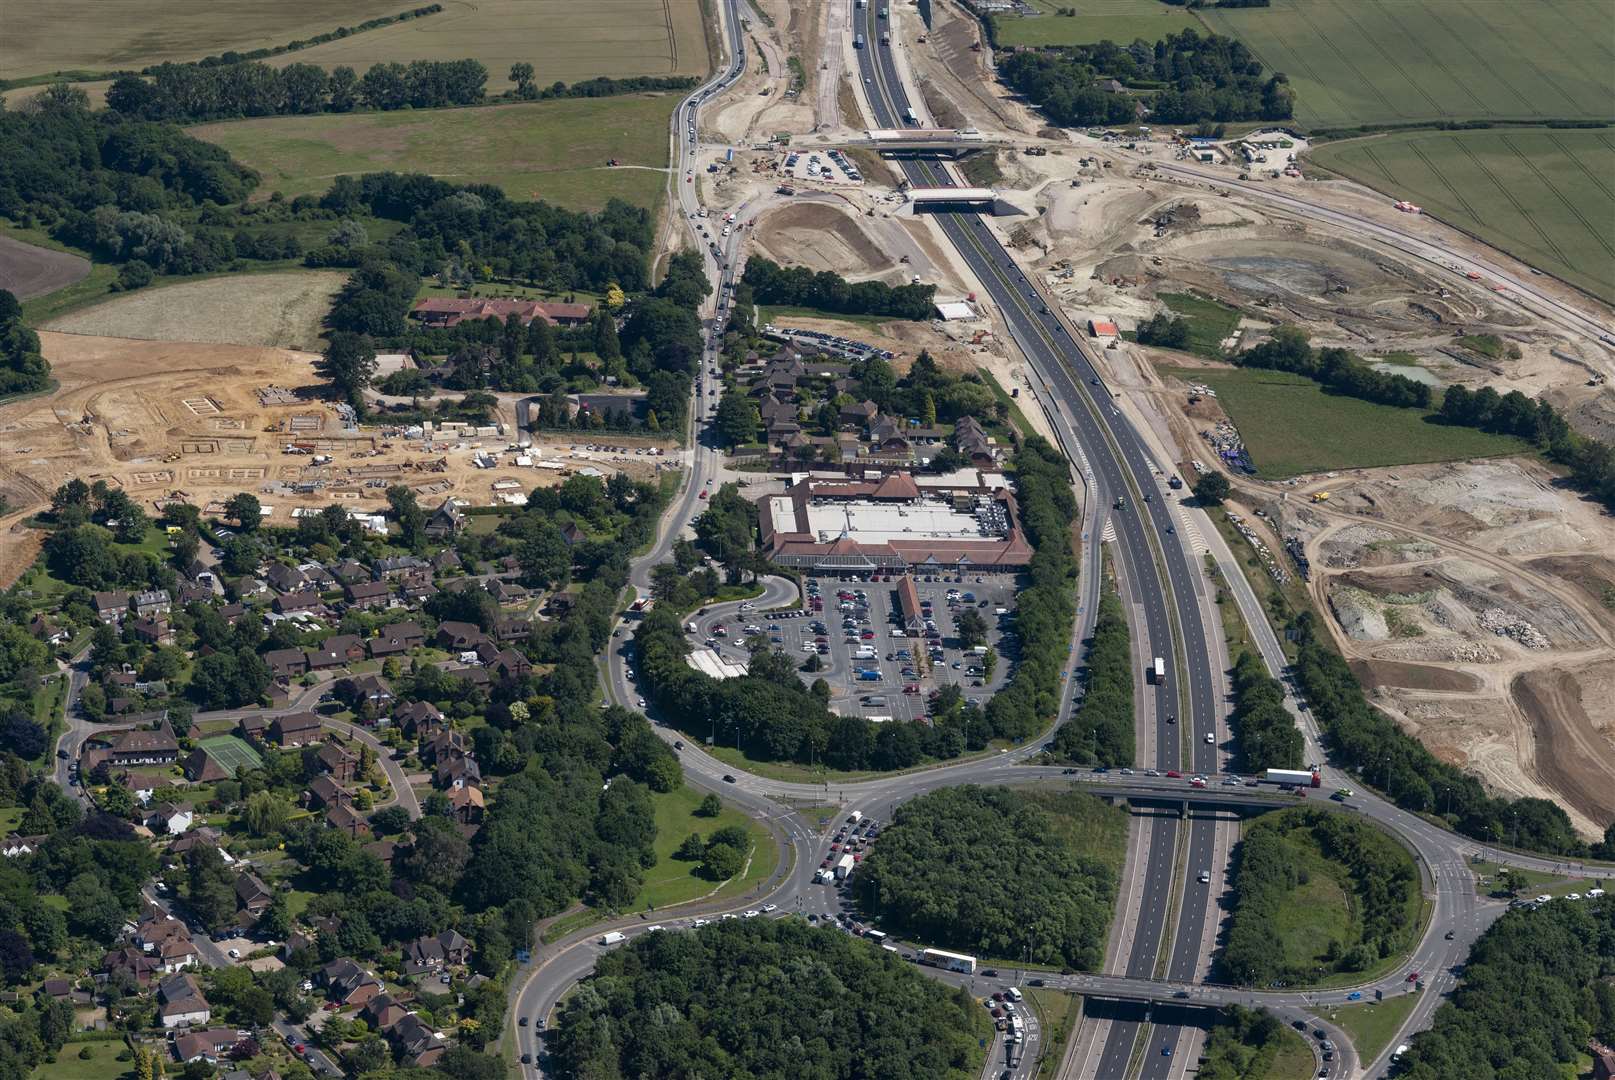 Junction 10a is being constructed 700 metres south east of Junction 10. Tesco Extra can be seen in this photo, as well as the Hinxhill Park construction site to the left of the shot where 200 homes are being built off the A20. Picture: Ady Kerry / Ashford Borough Council